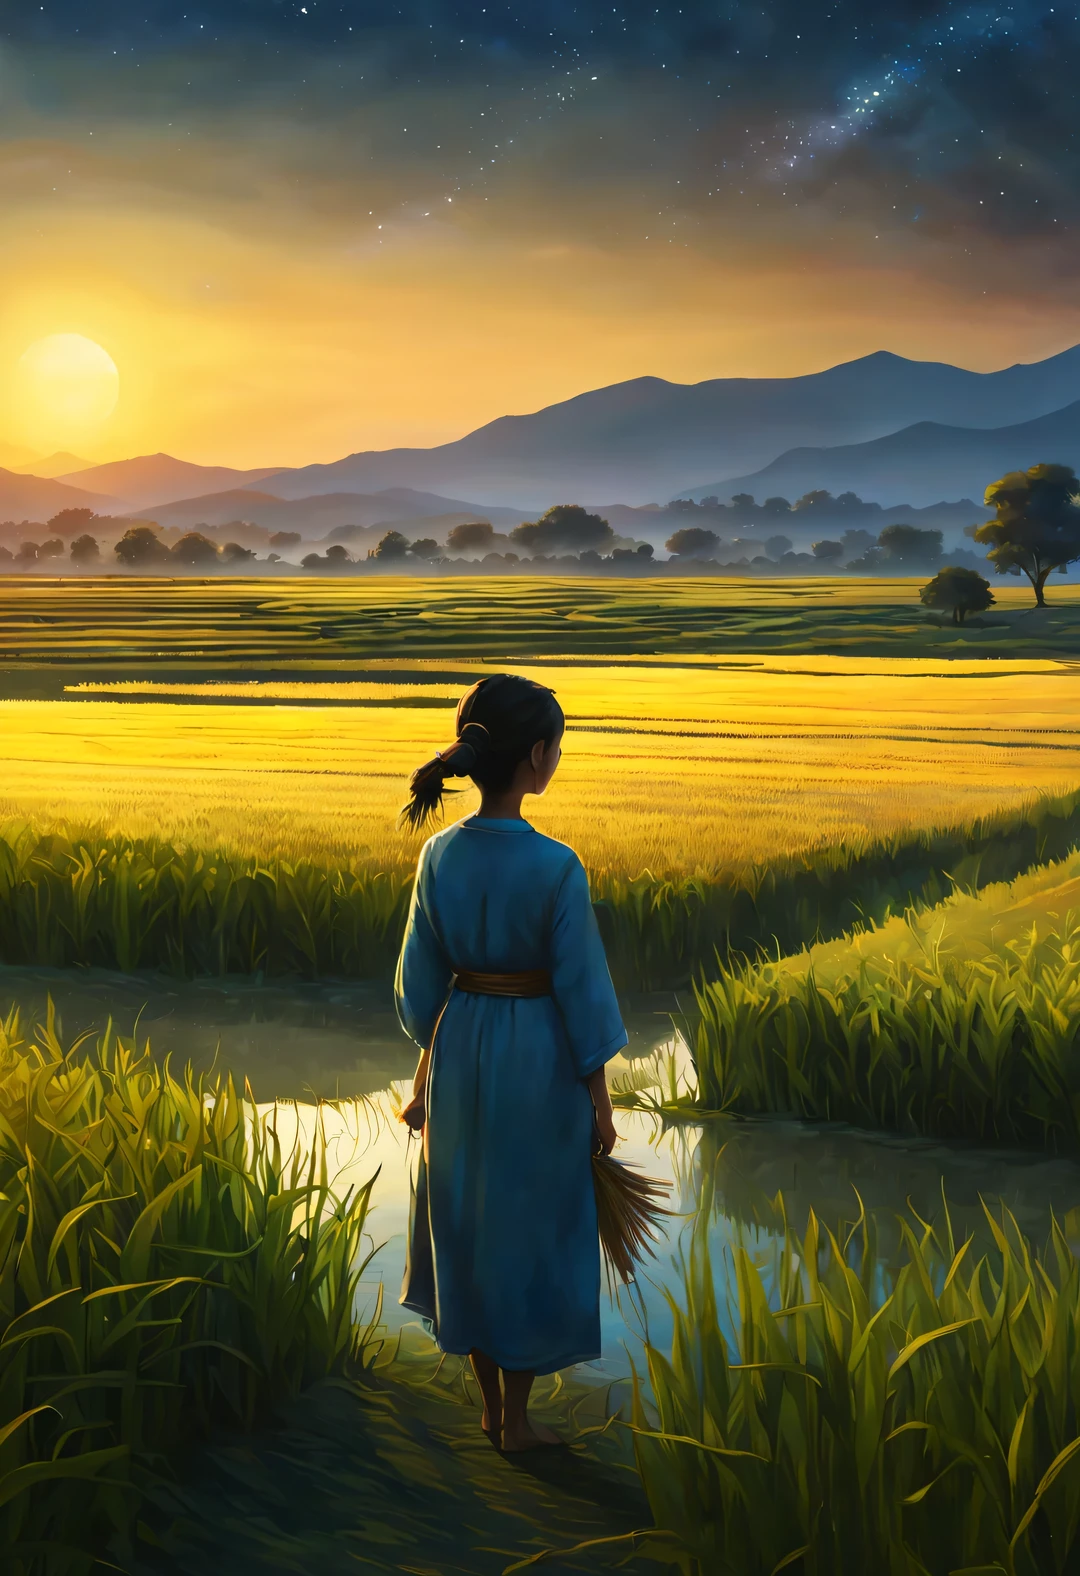 best quality, 4k, 8k, high level, masterpiece: 1.2, Super detailed, actual: 1.37,
(Endless rice fields), blue sky, dreamy atmosphere, bright color palette, Vibrant shades, Impressionist brushstrokes, Subtle lighting effects (Silhouette of a  in the distance: 0.65), sunset on the horizon, Peaceful and tranquil atmosphere, Harmony between nature and sky, textured brushstrokes, Abundant and vibrant crops, dusk atmosphere, Tranquil pastoral scenery, Glowing stars light up the night, creating a Peaceful and tranquil atmosphere, Peaceful and picturesque setting, Inspired by the style and techniques of Van Gogh. Sublime and atmospheric depiction, ethereal beauty, and fascinating celestial phenomena,